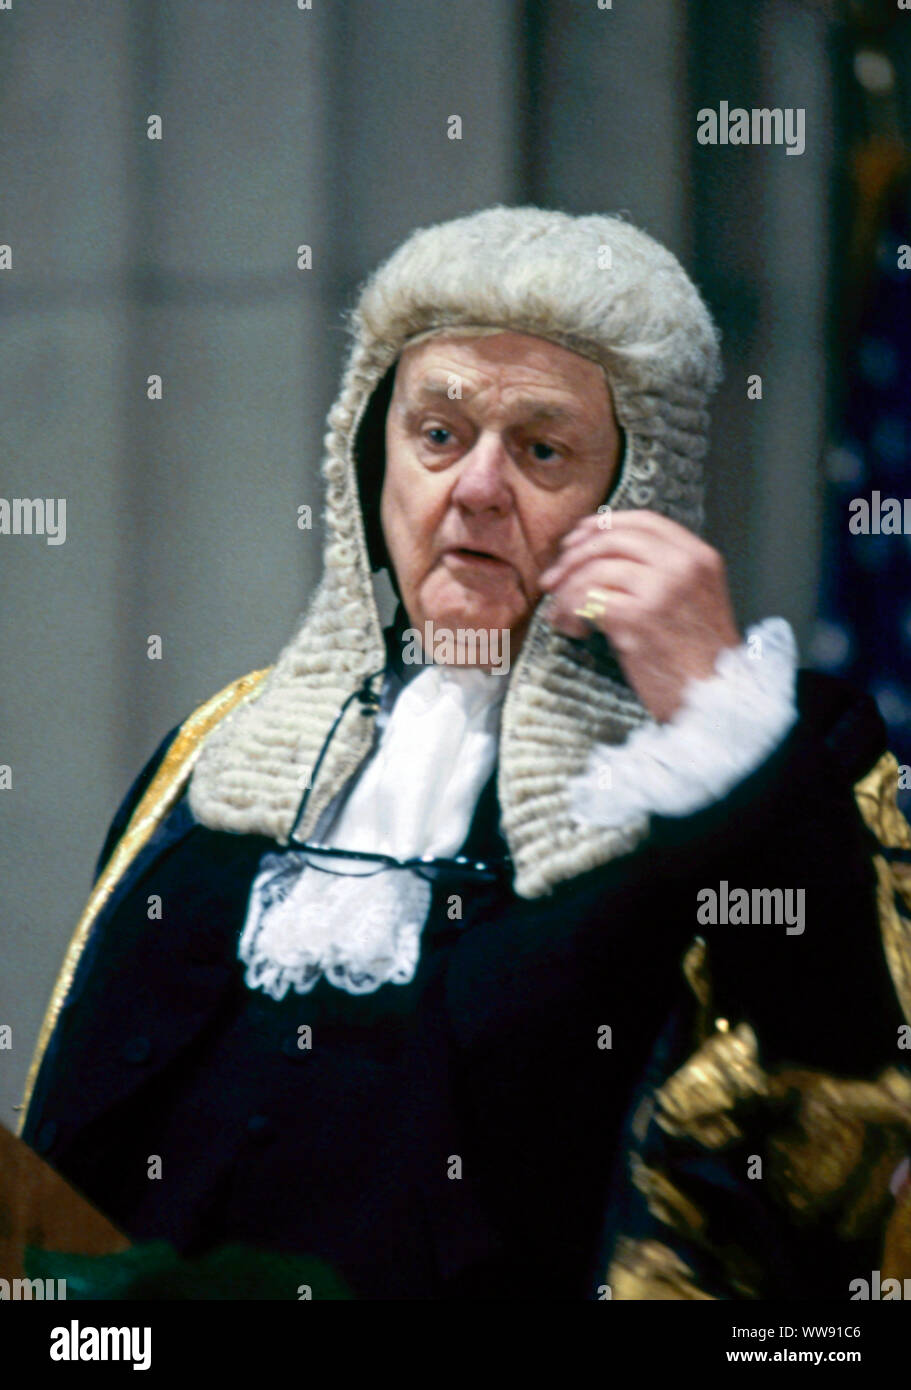 Washington DC, USA, 1987Quintin Hogg, Baron Hailsham Lord High Chancellor of Great Britain attends Smithsonian conference of international Supreme Court Justices. Credit: Mark Reinstein / MediaPunch Stock Photo